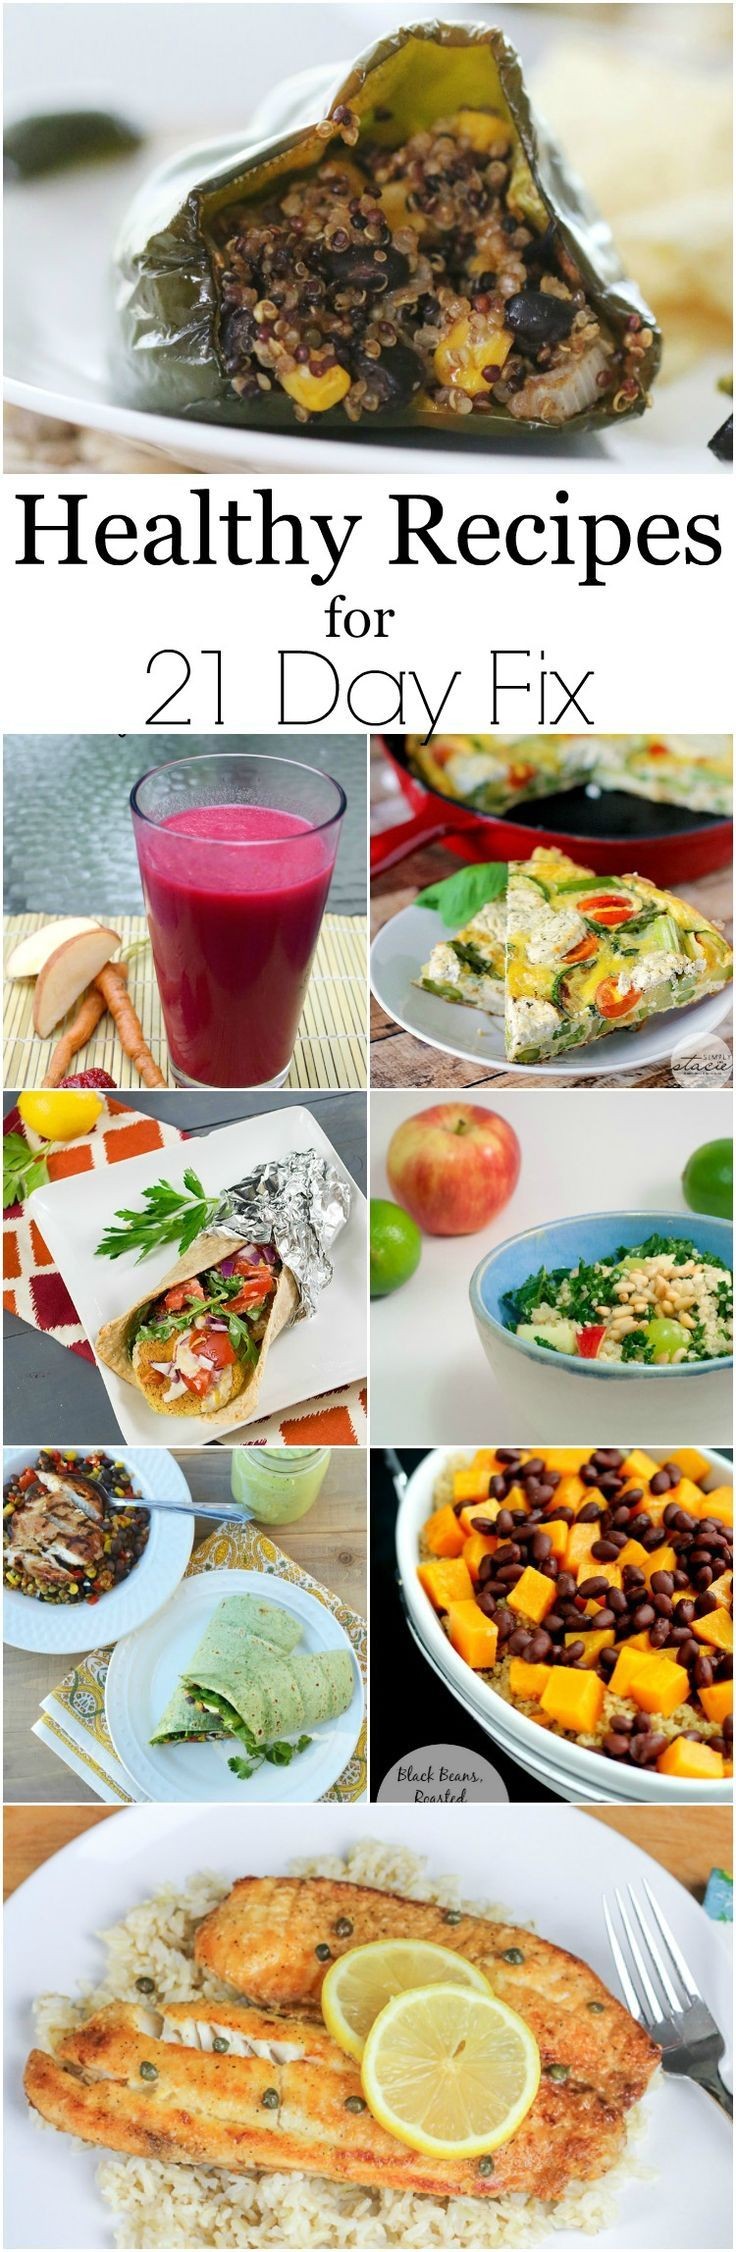 Healthy Recipes for 21 Day Fix for dinner or lunch...